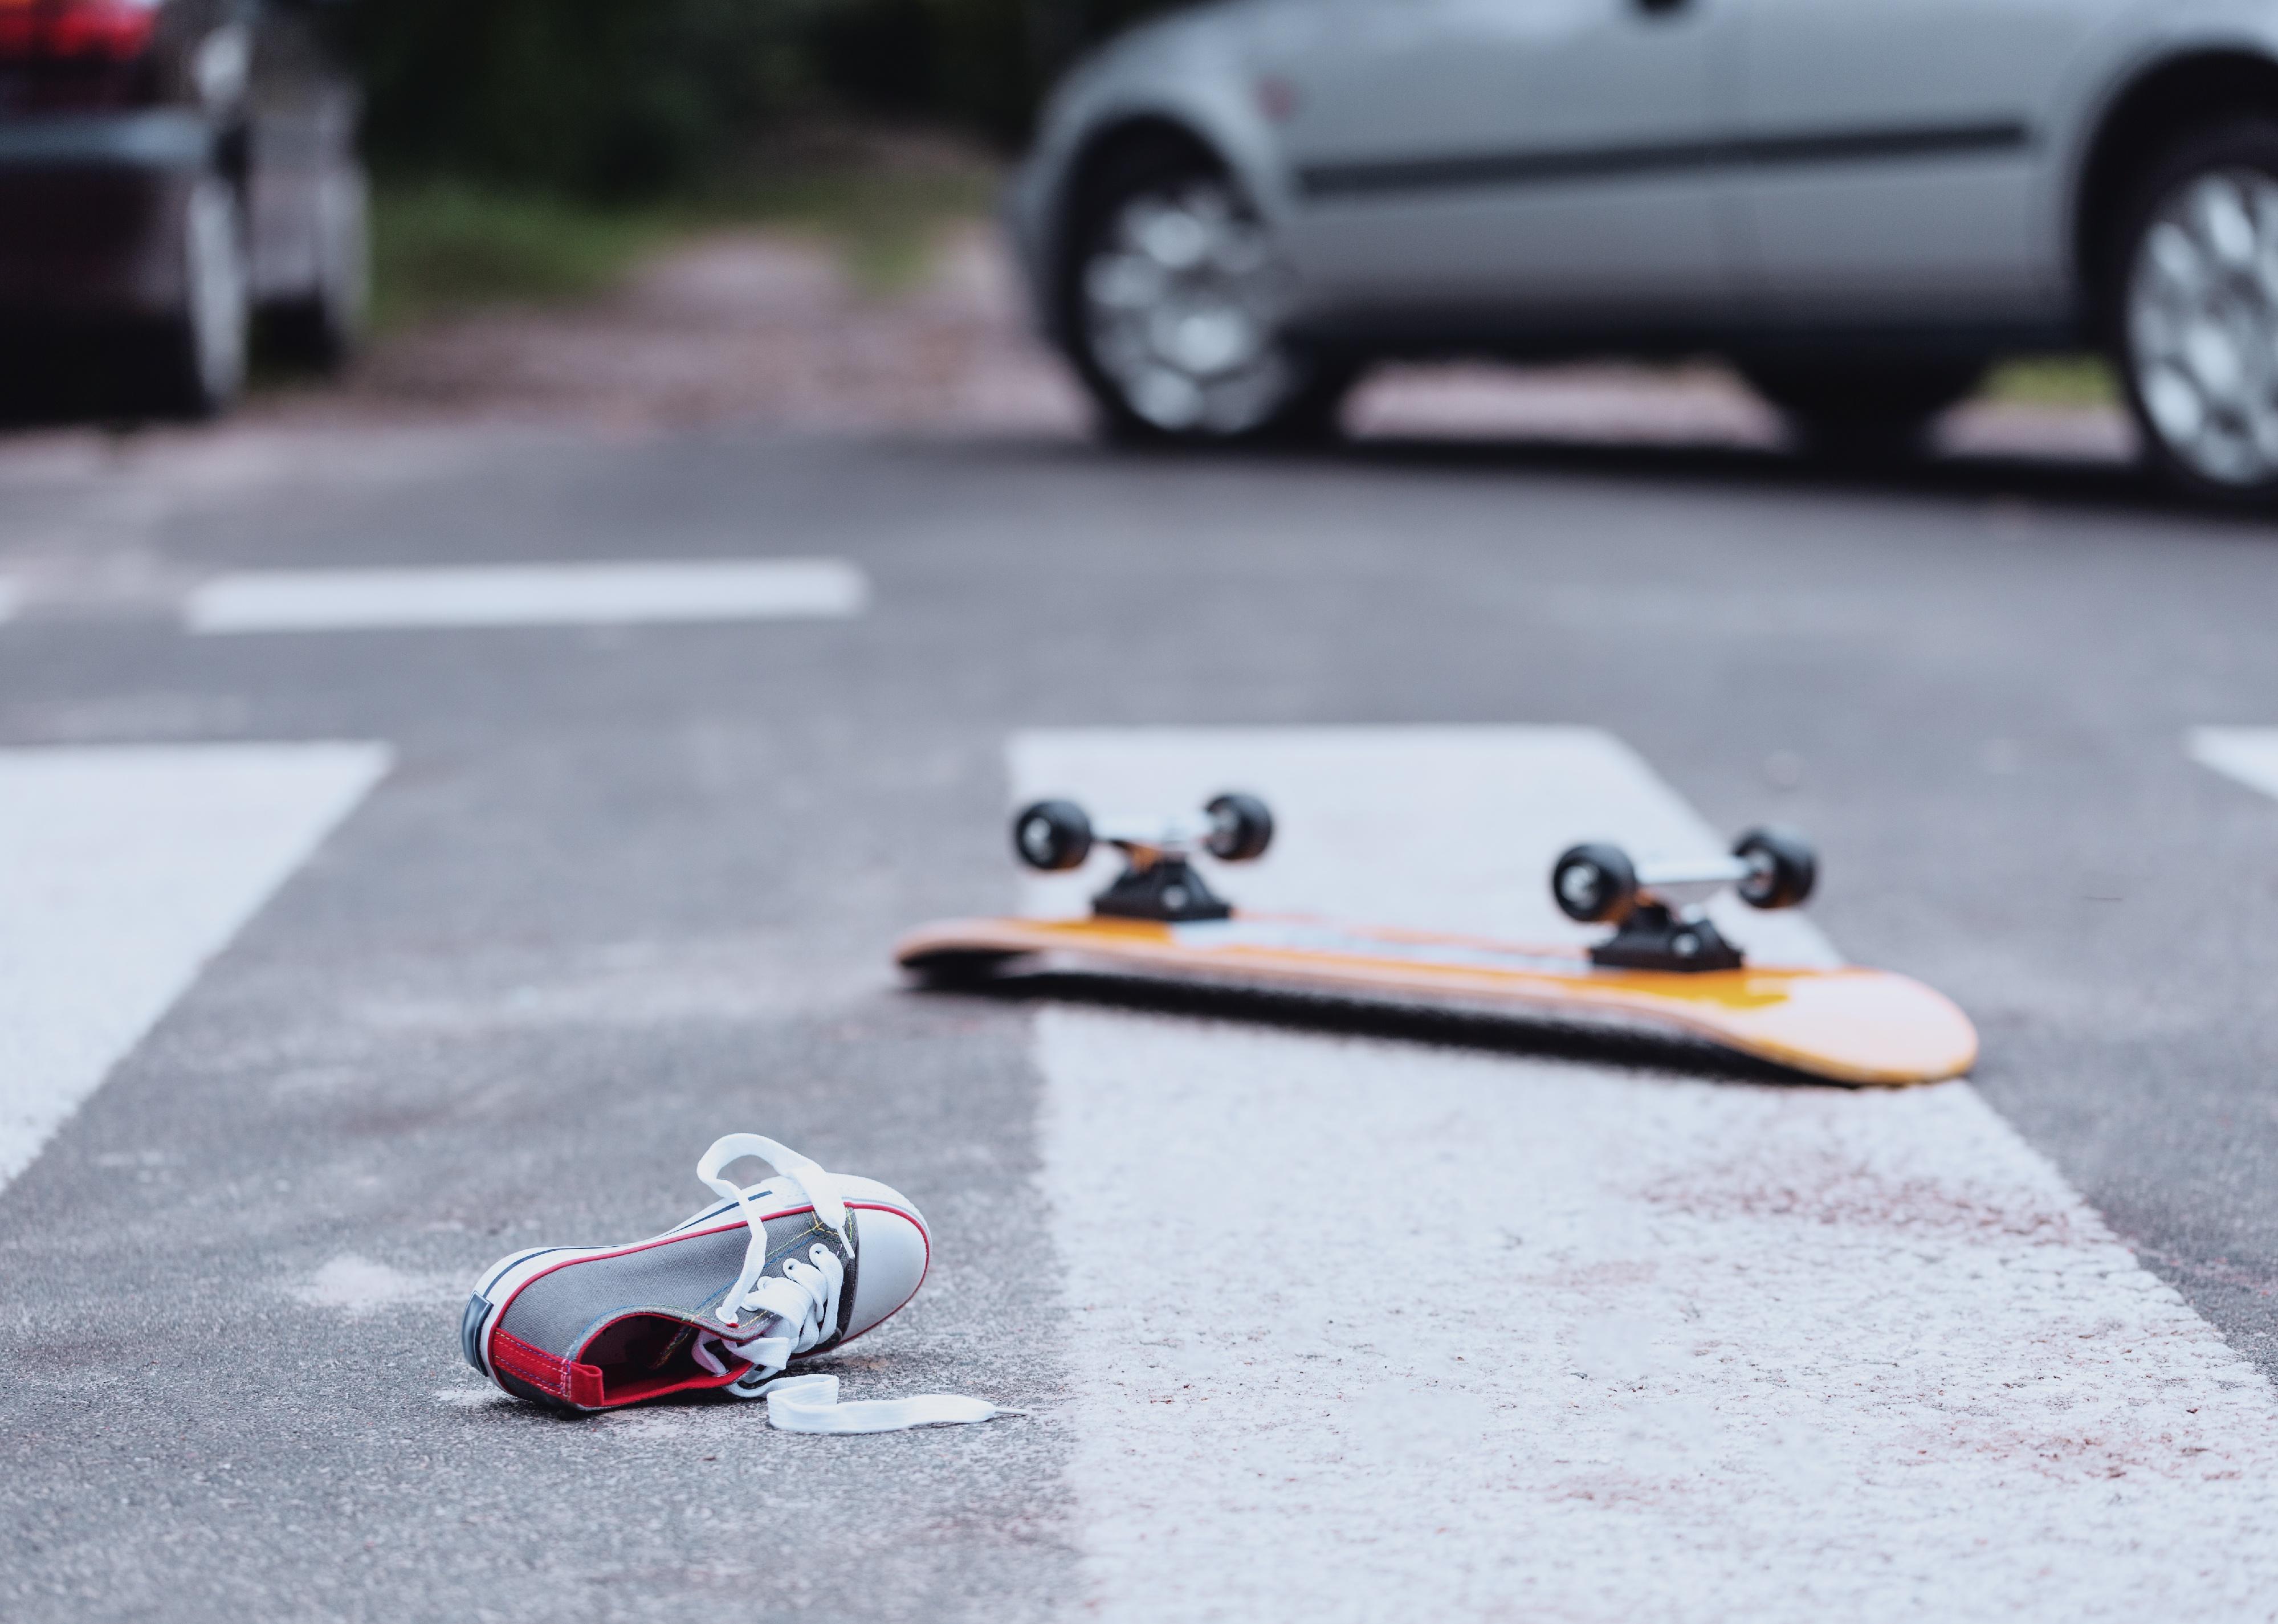 Teenager's shoe and skateboard lying on a pedestrian crossing